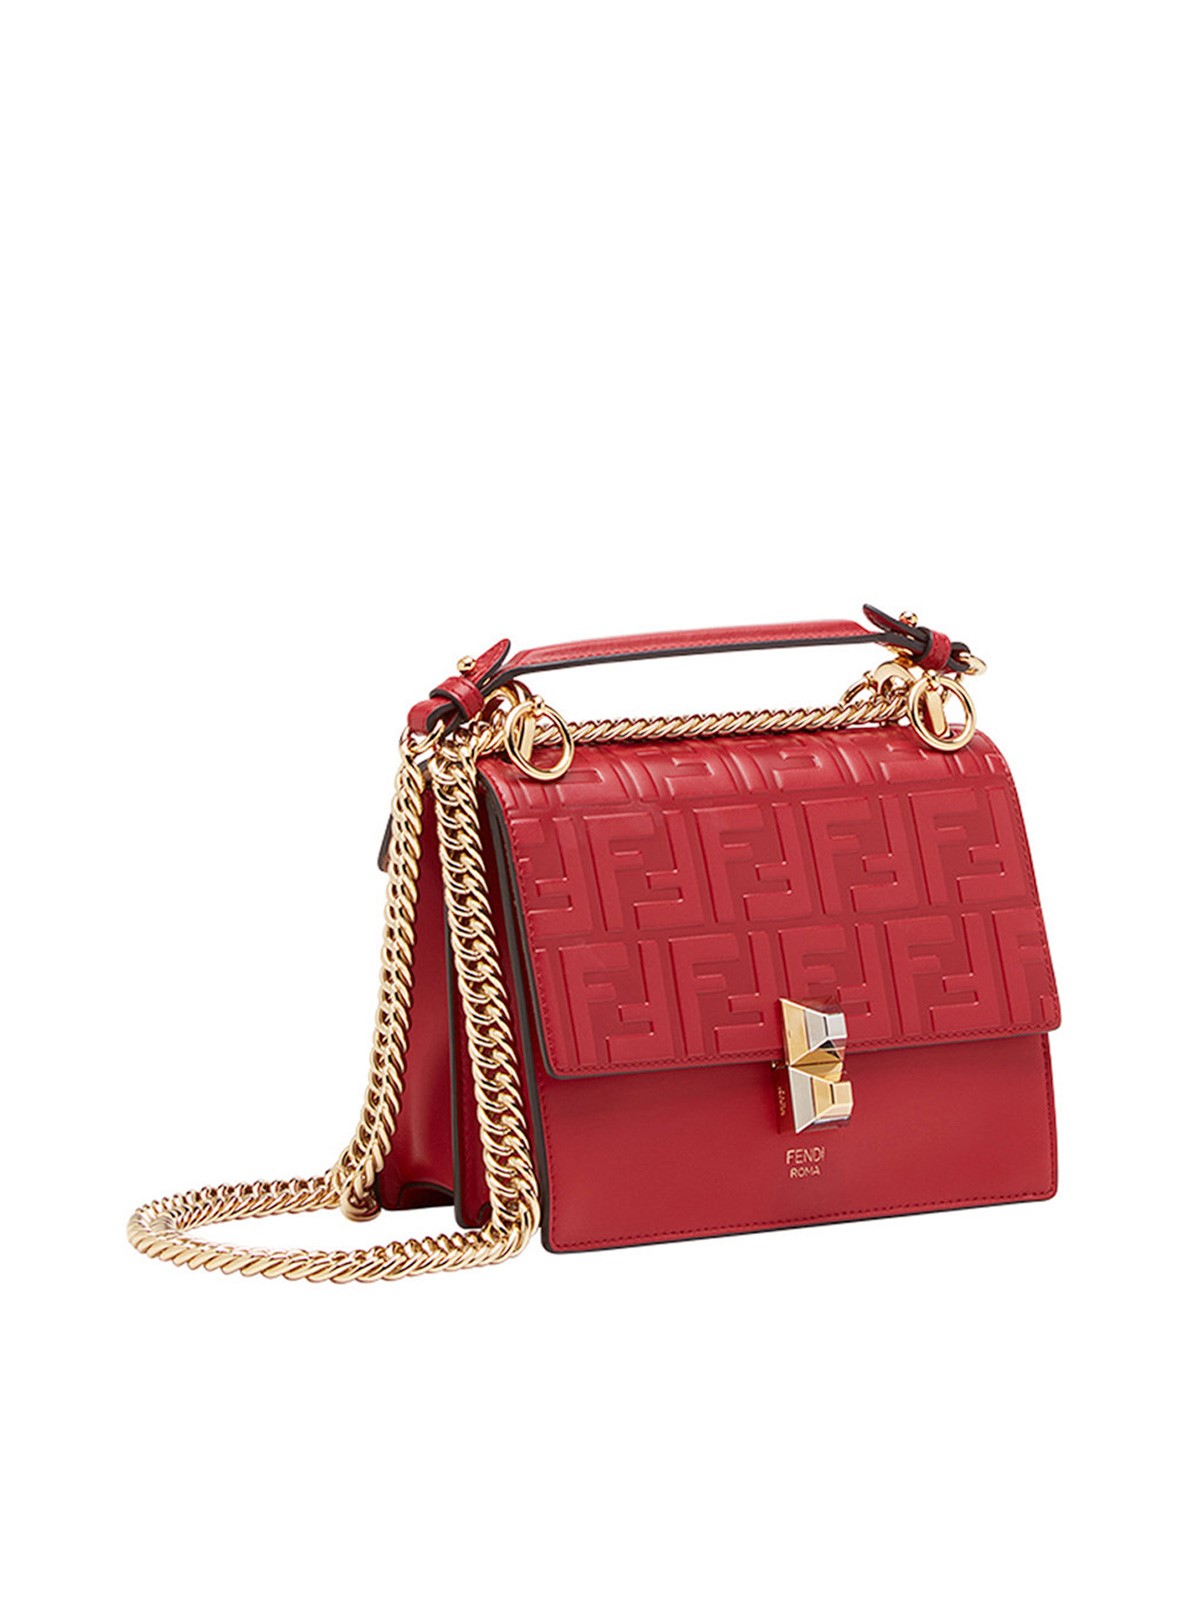 fendi SMALL KAN I BAG available on montiboutique.com - 22793